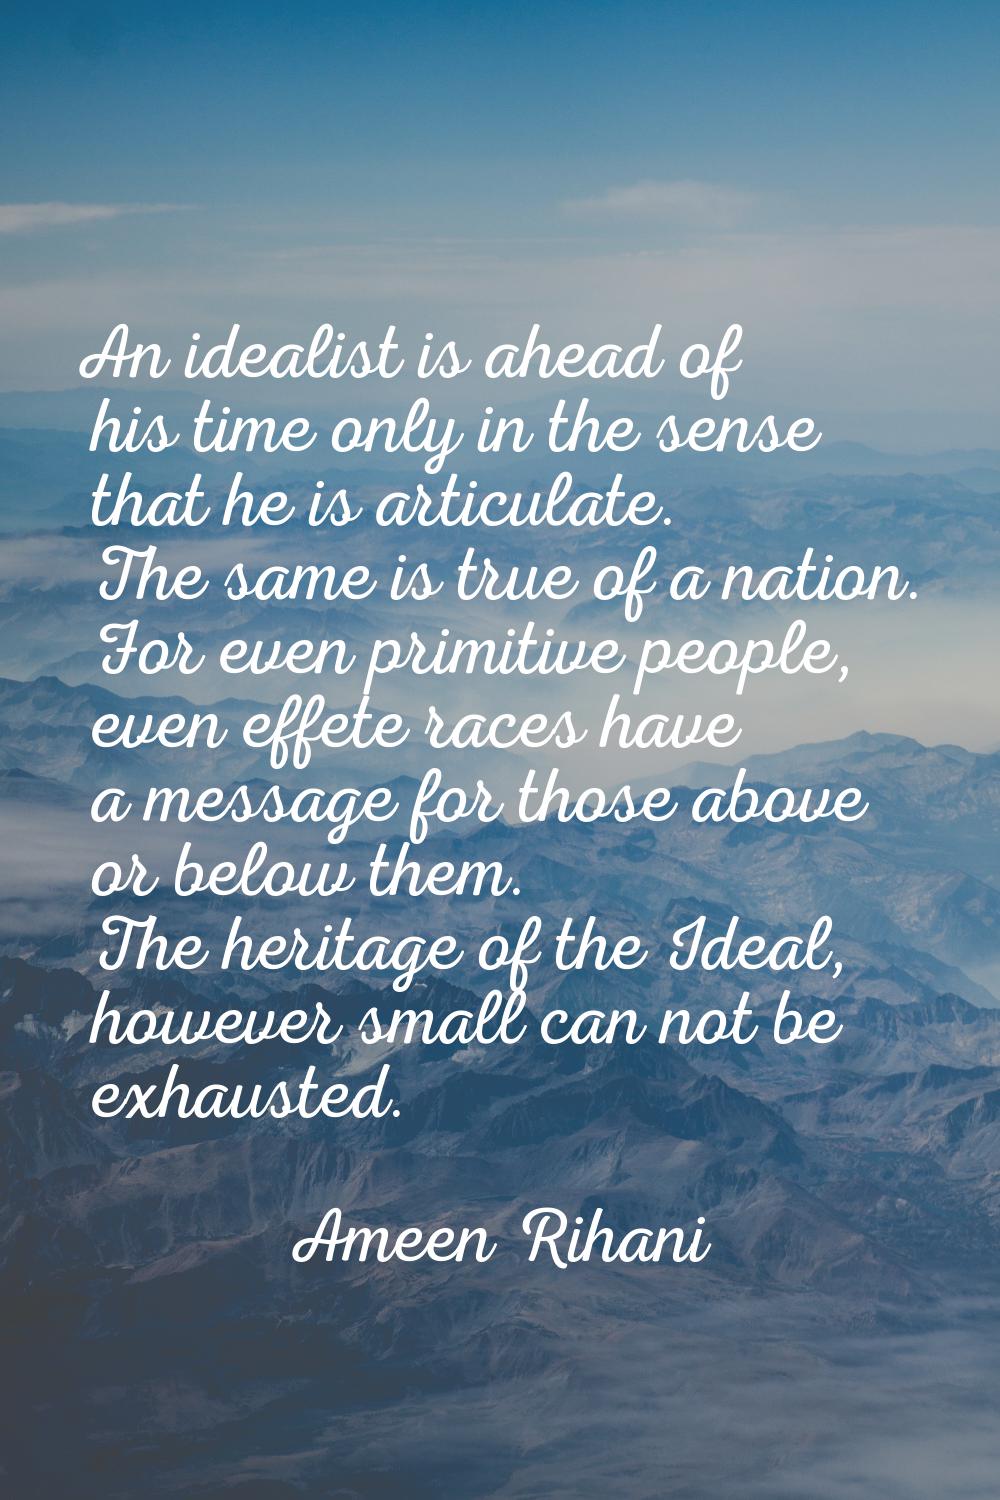 An idealist is ahead of his time only in the sense that he is articulate. The same is true of a nat